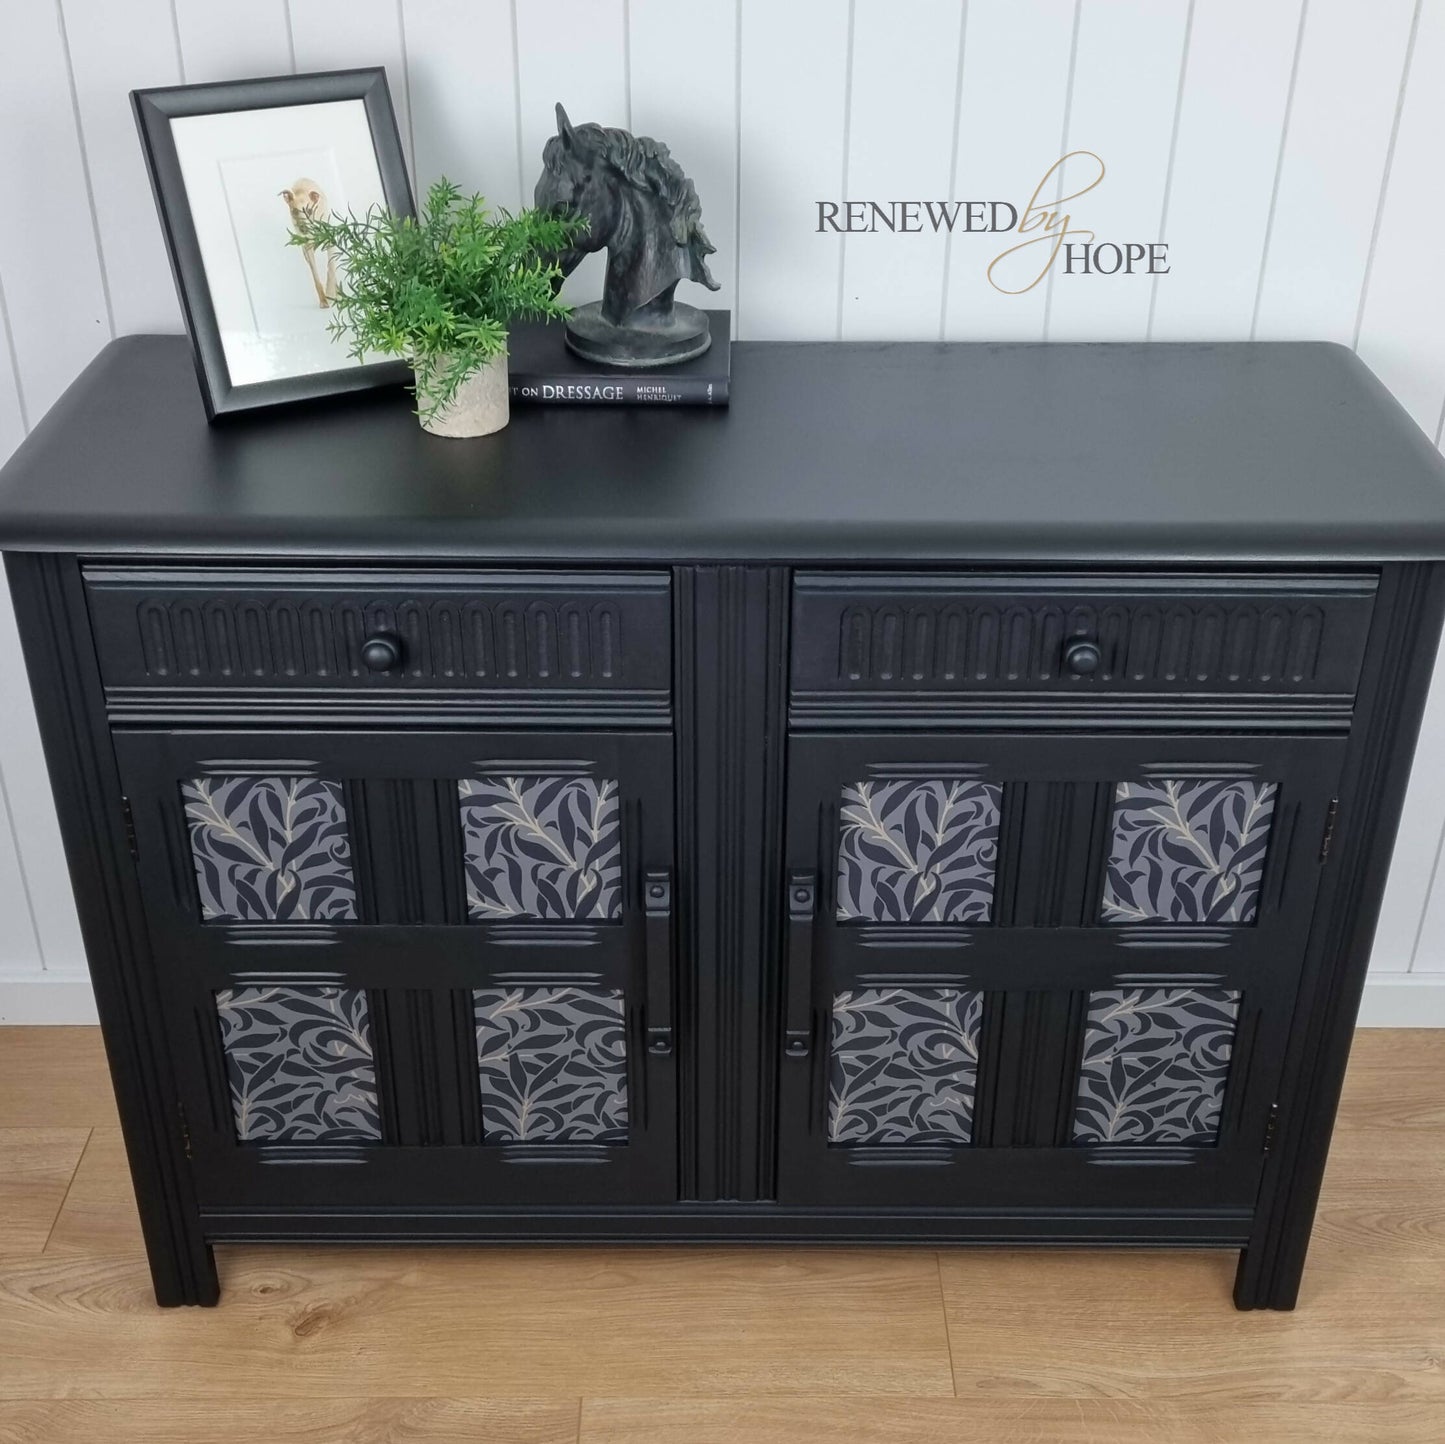 SOLD - Black Vintage Priory Sideboard / Cupboard / Storage with William Morris Willow Bough detail, Hallway, Dining Room, Upcycled